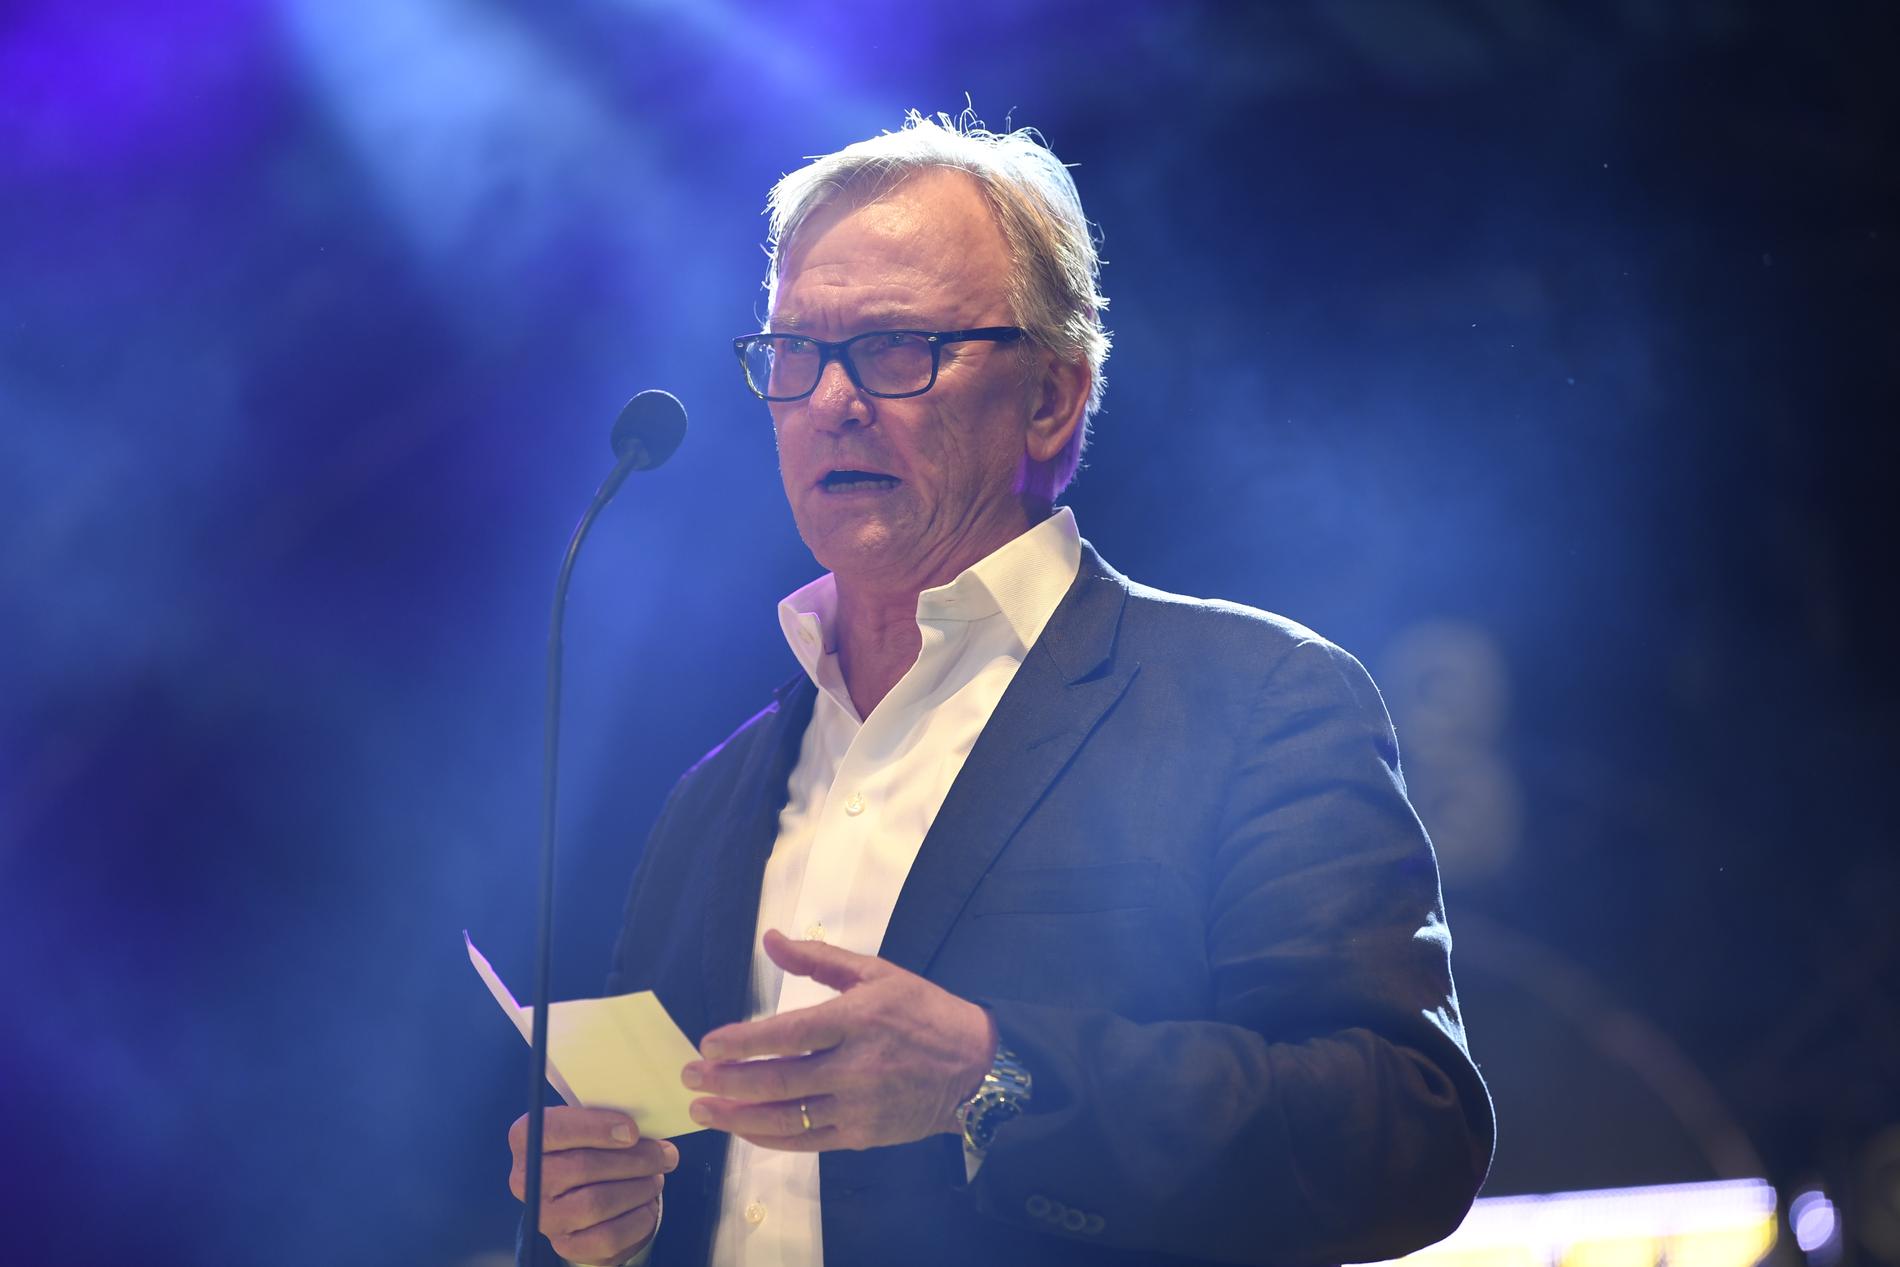 Klas Berglind at his first public appearence since the death of his son accepting a Rockbjörnen award on behalf of Avicii